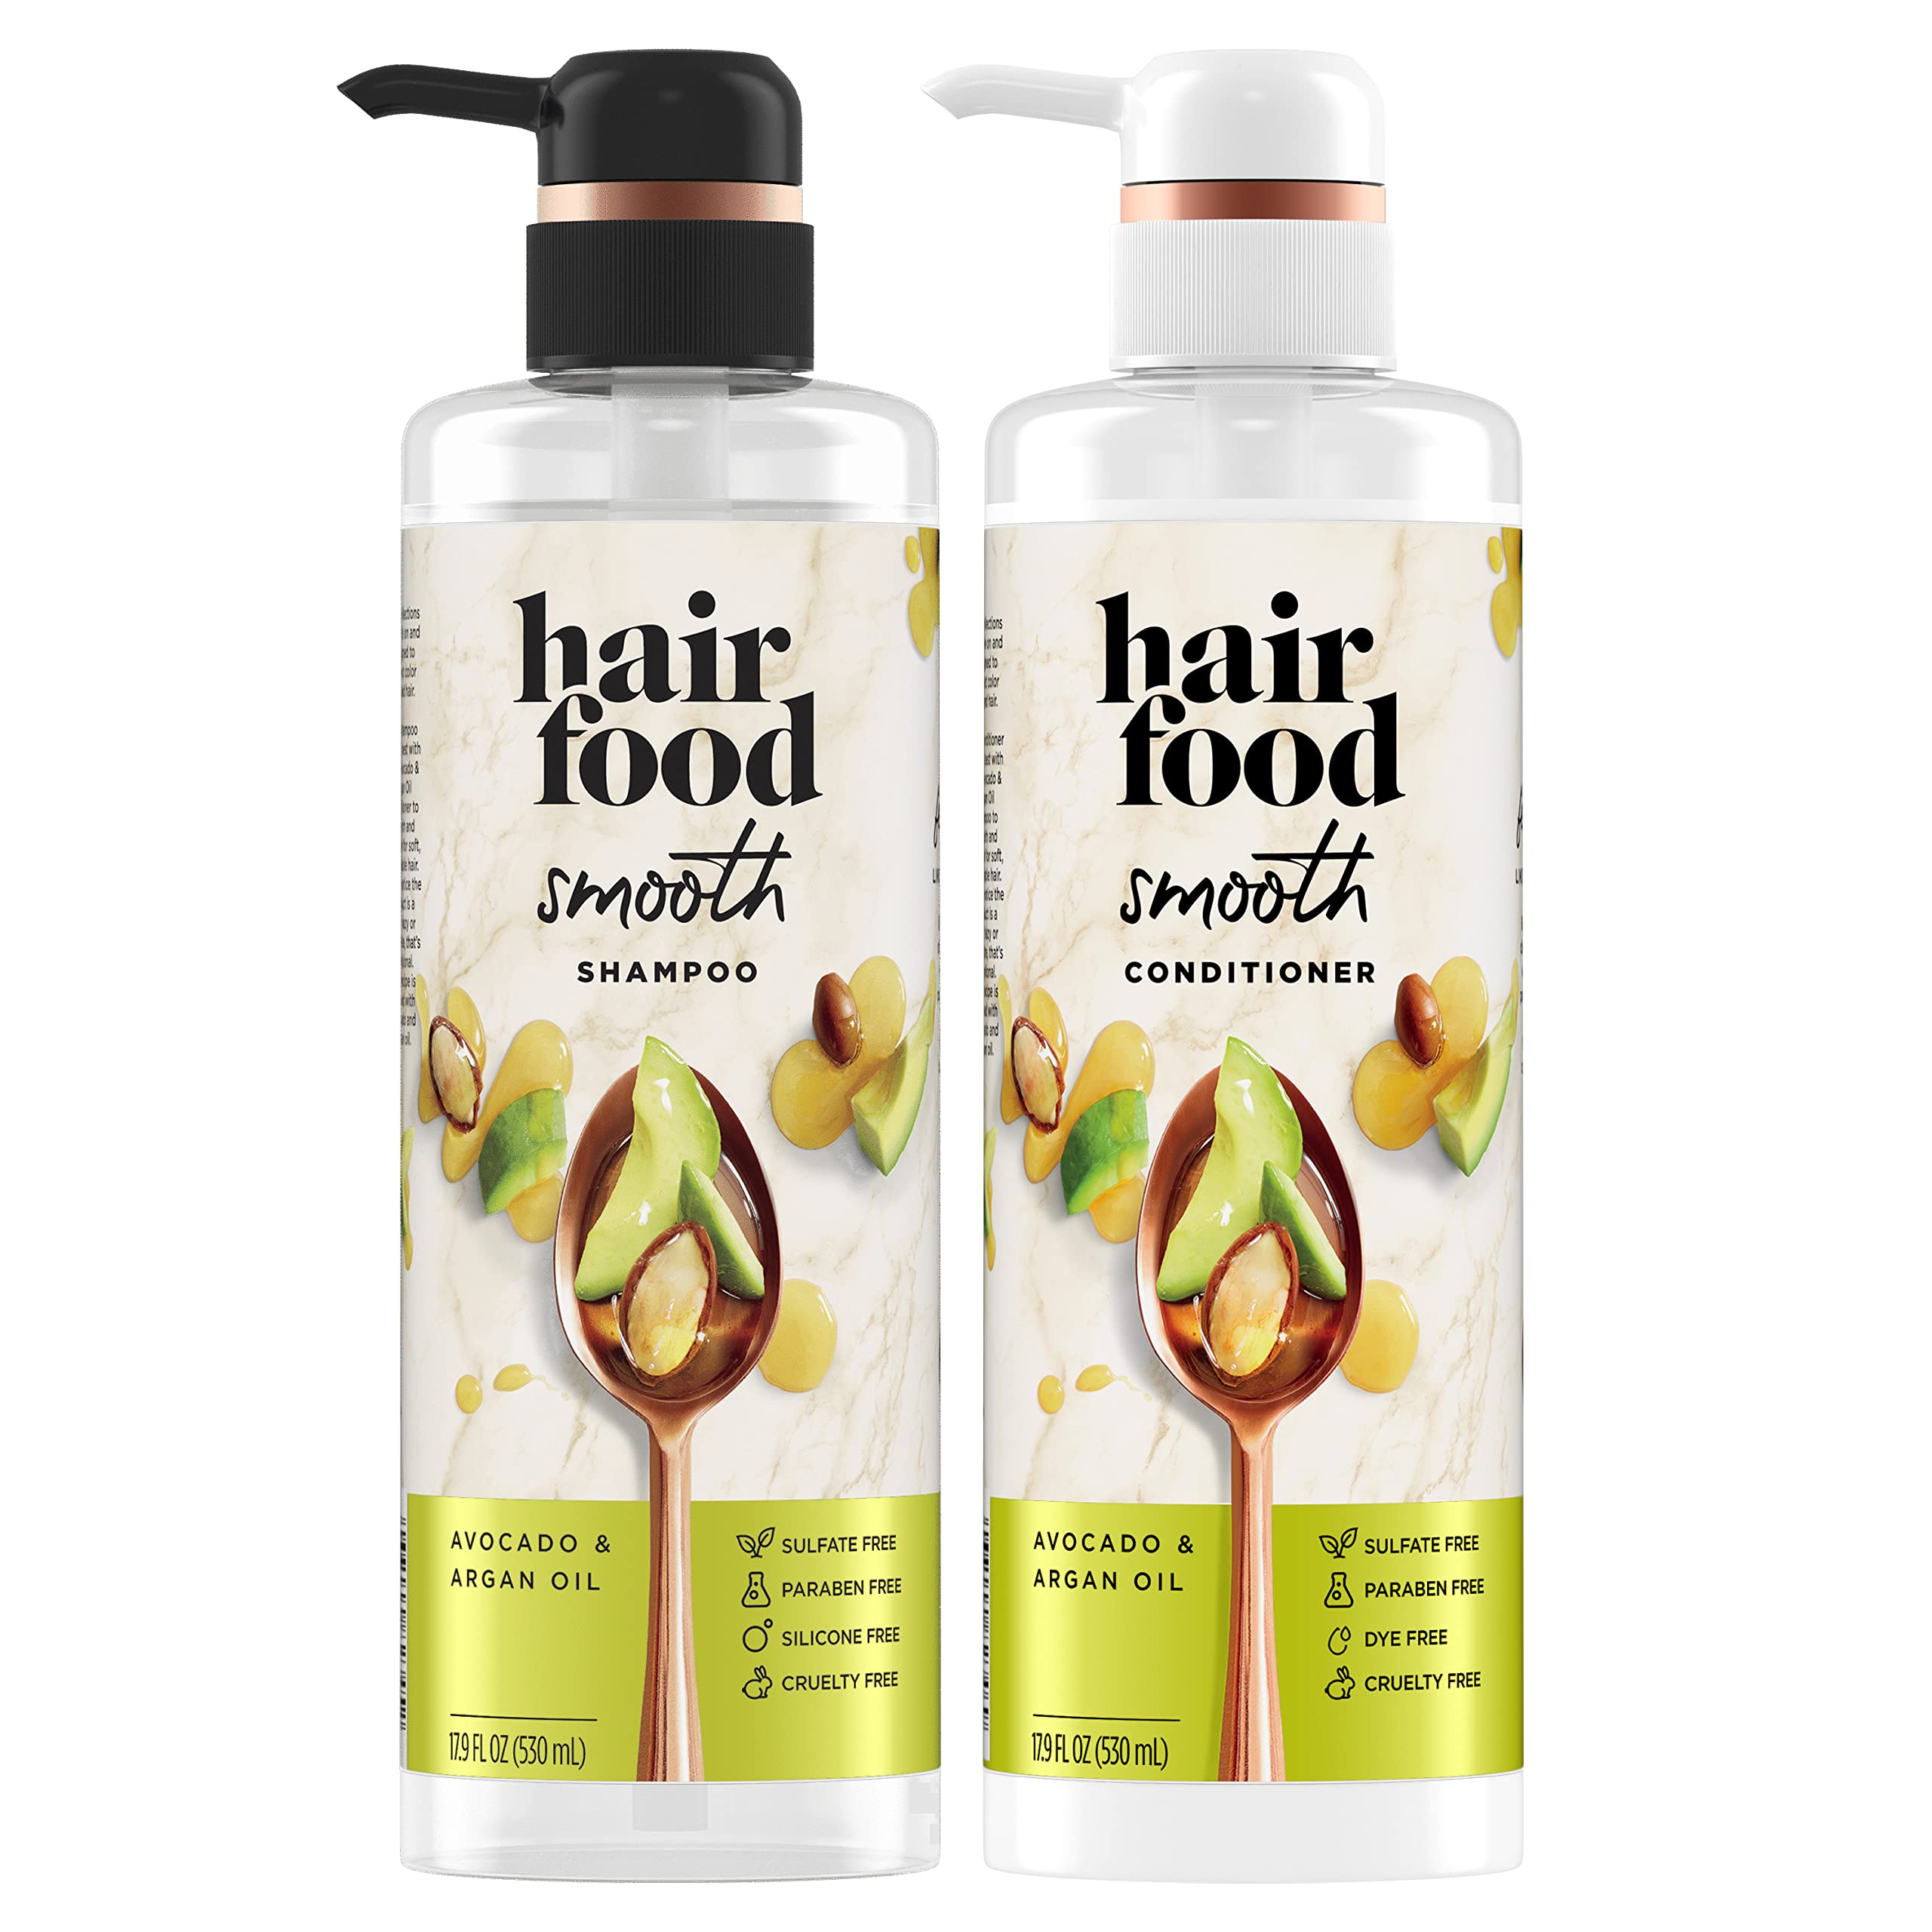 Hair Food Sulfate Free Shampoo and Conditioner Set, with Argan Oil and Avocado, Natural Ingredients, 17.9 Fl Oz Each